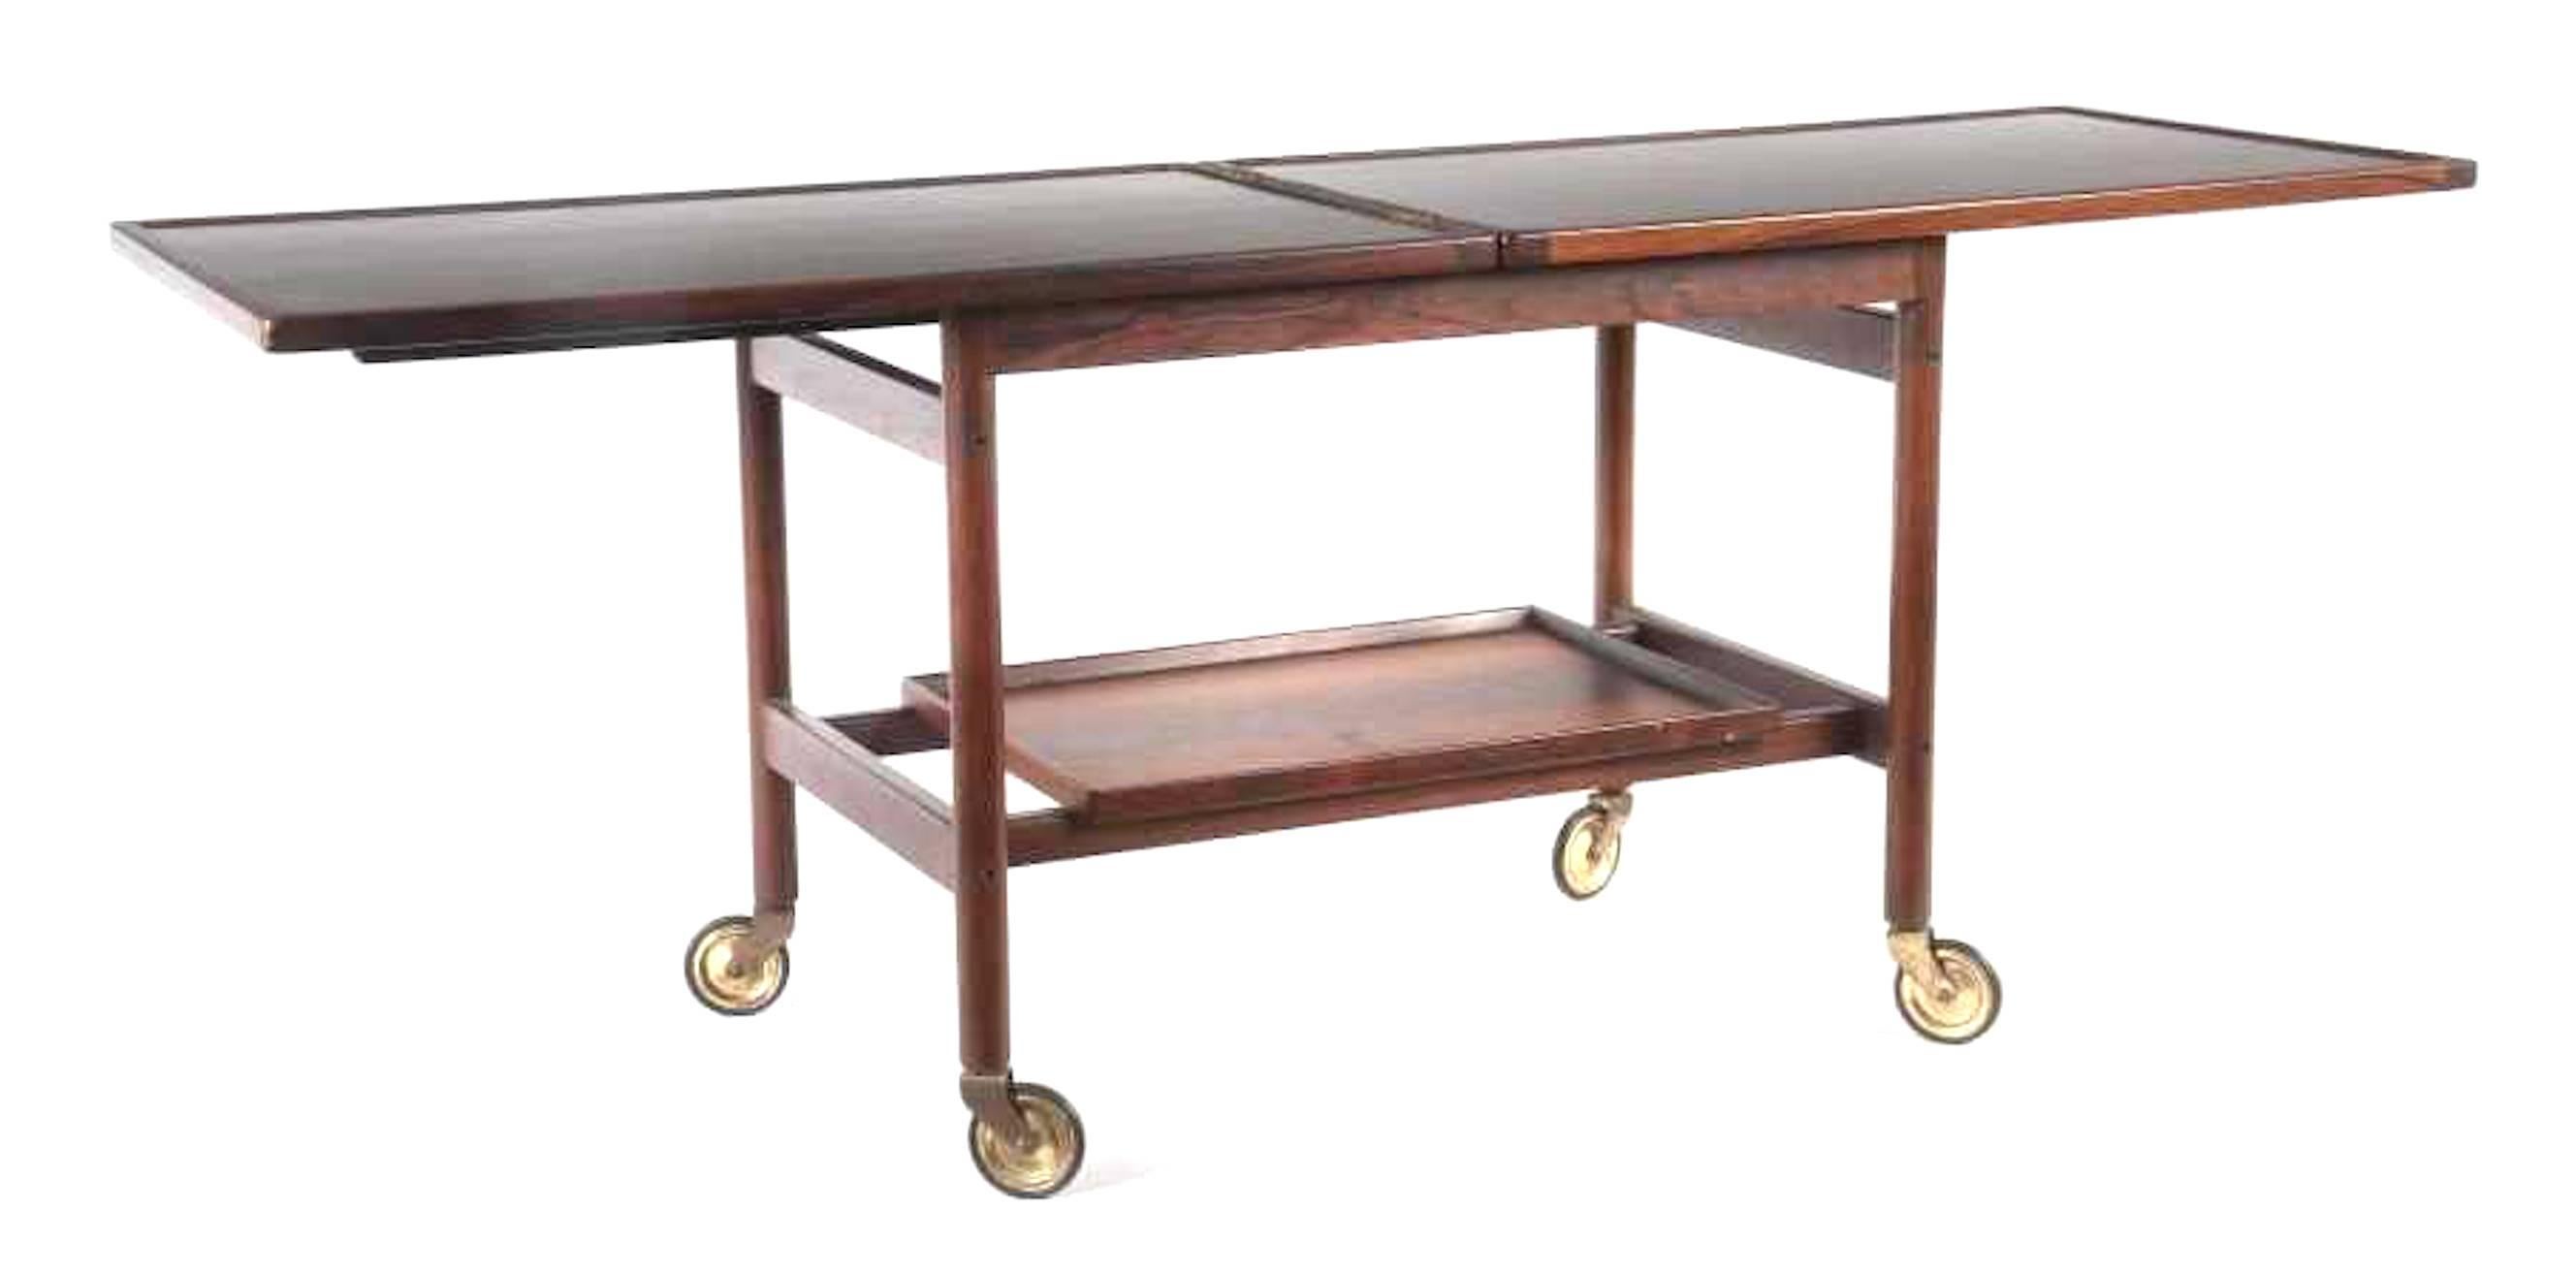 Danish bar cart designed by Kurt Ostervig in the 1960s. Made of rosewood with a remarkable wood grain. Features a rectangular shape o round wooden legs with a removable casters. The tabletop can be folded out to double width and is laminated black